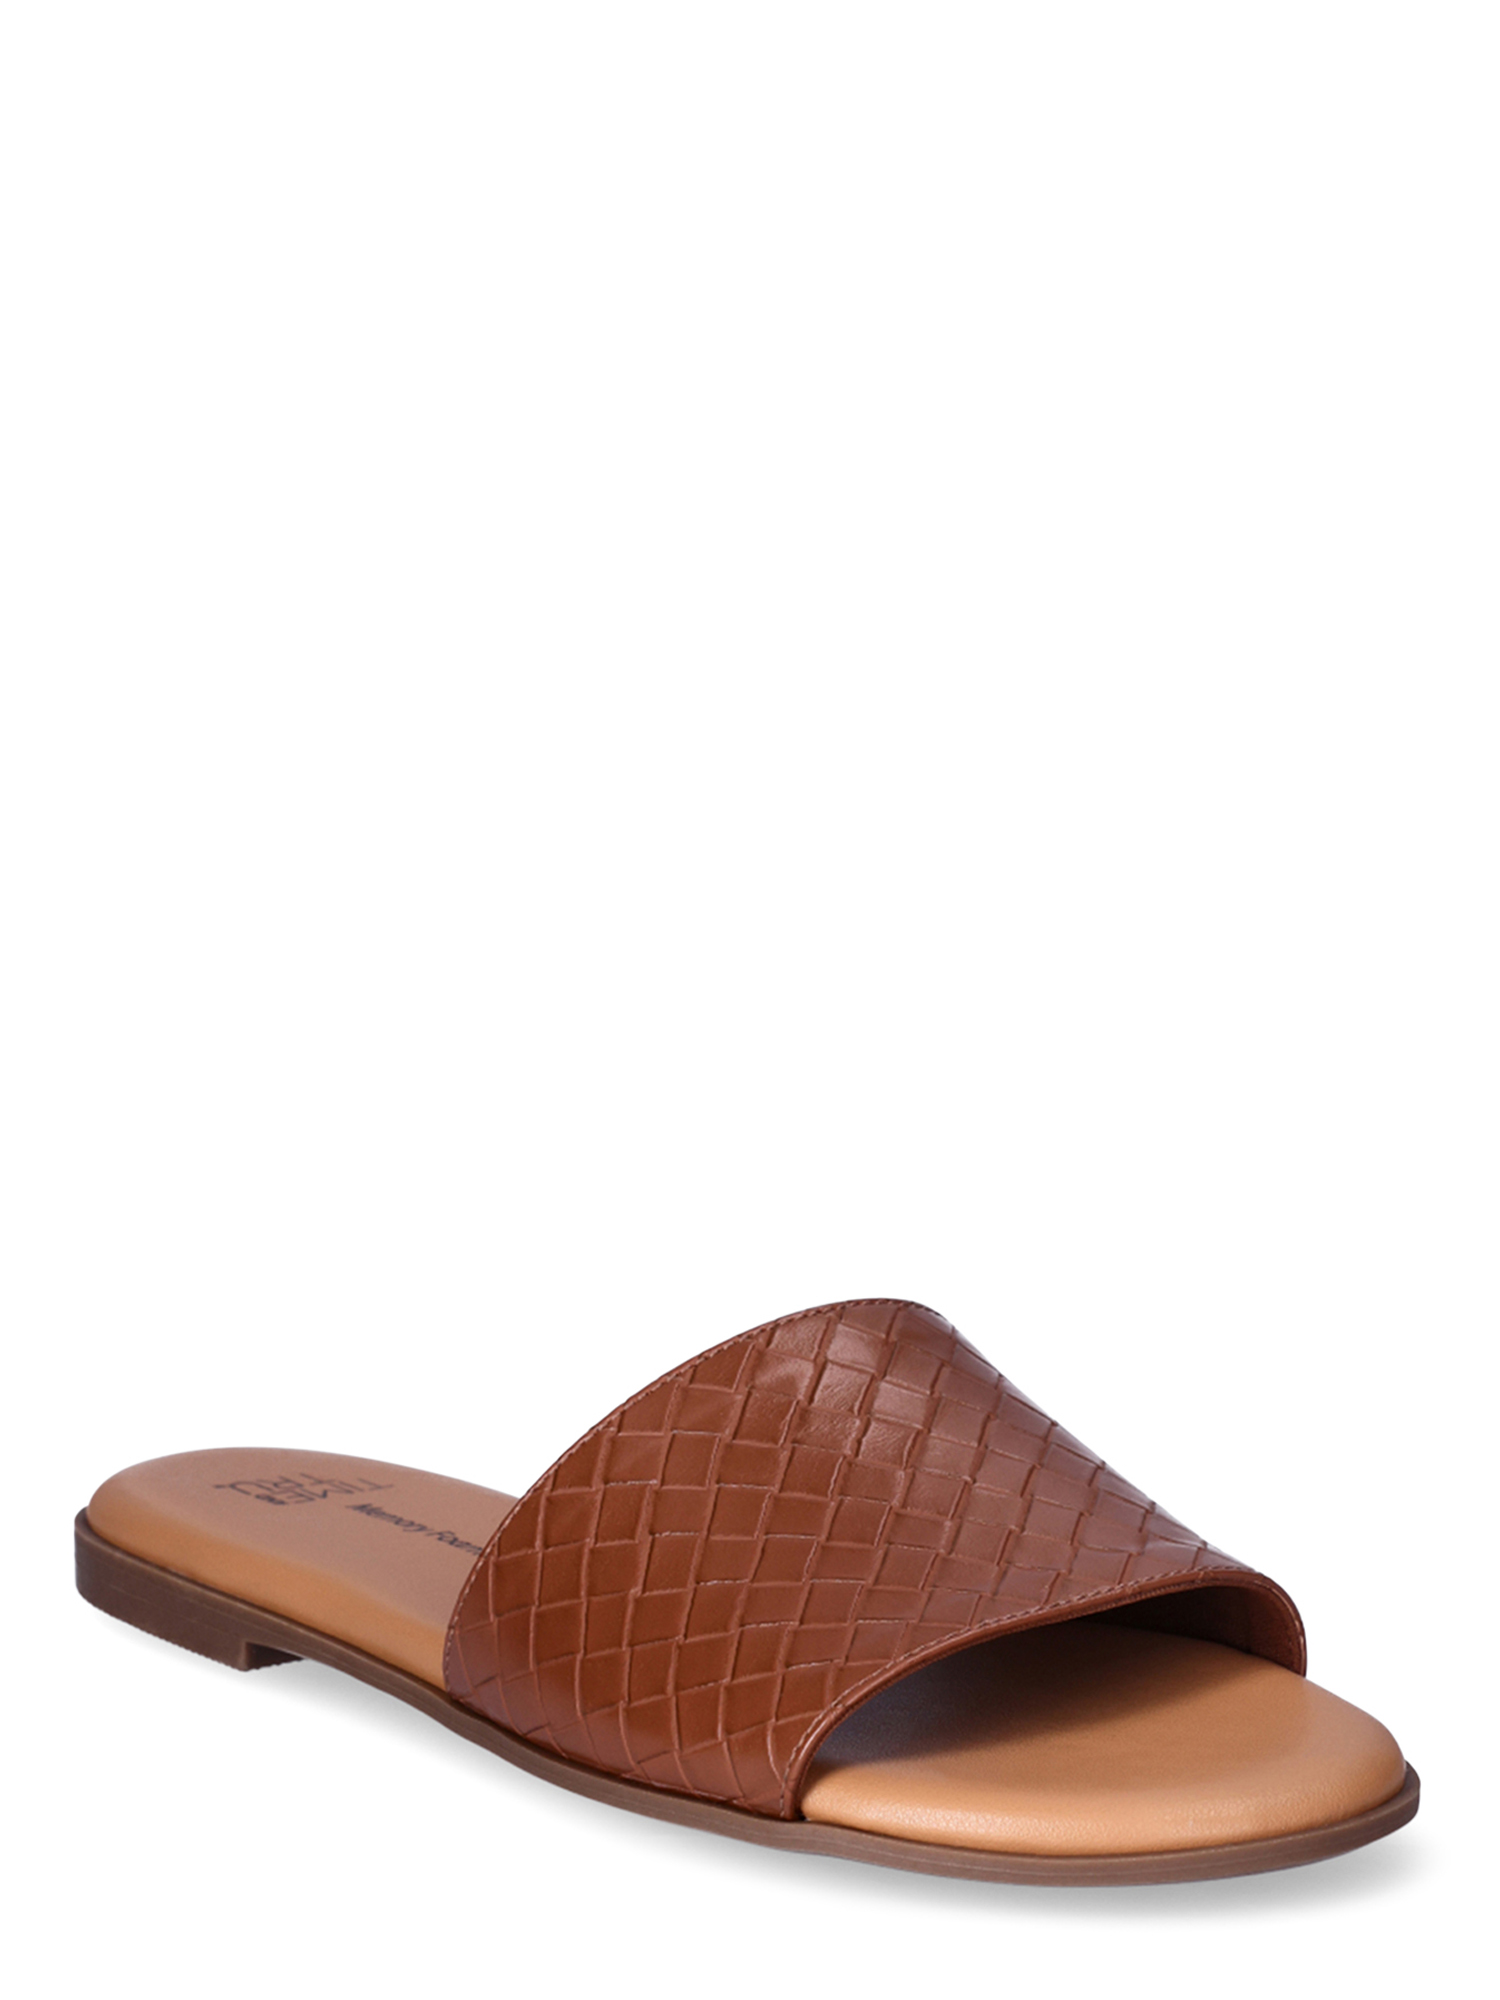 Time and Tru Women's Woven Slide Sandals